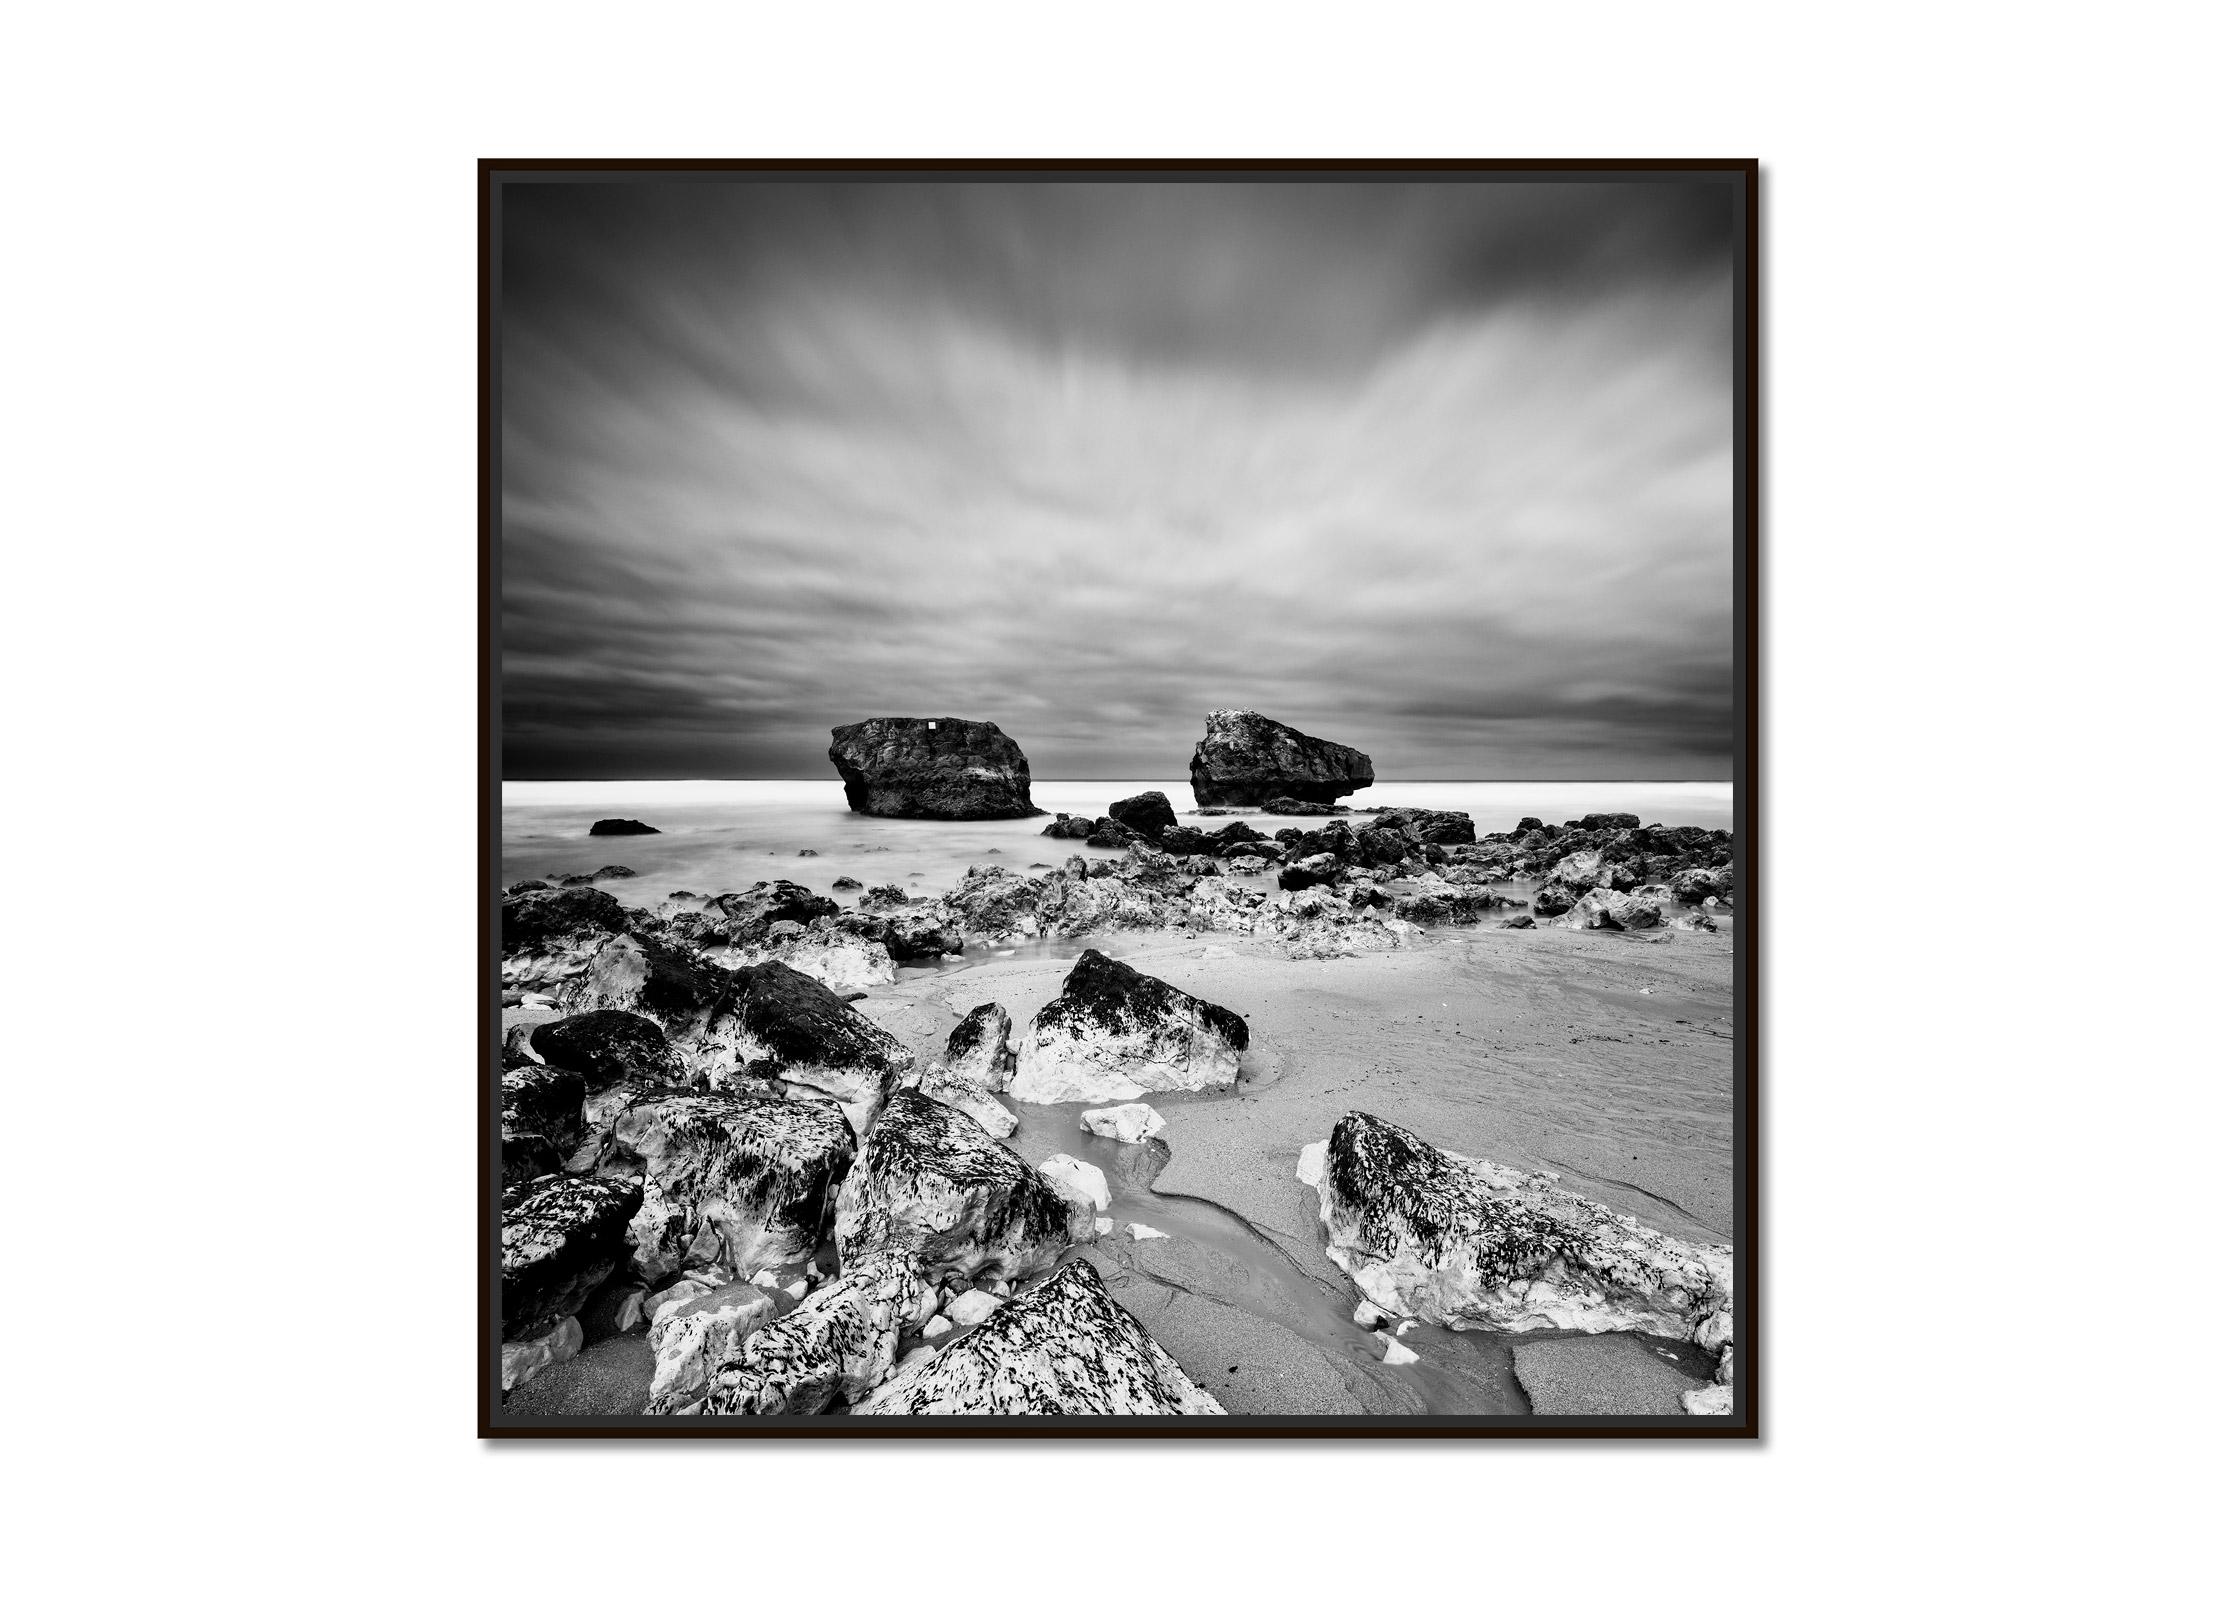 Point de vue, rocky beach, stormy, France, black and white landscape photography - Photograph by Gerald Berghammer